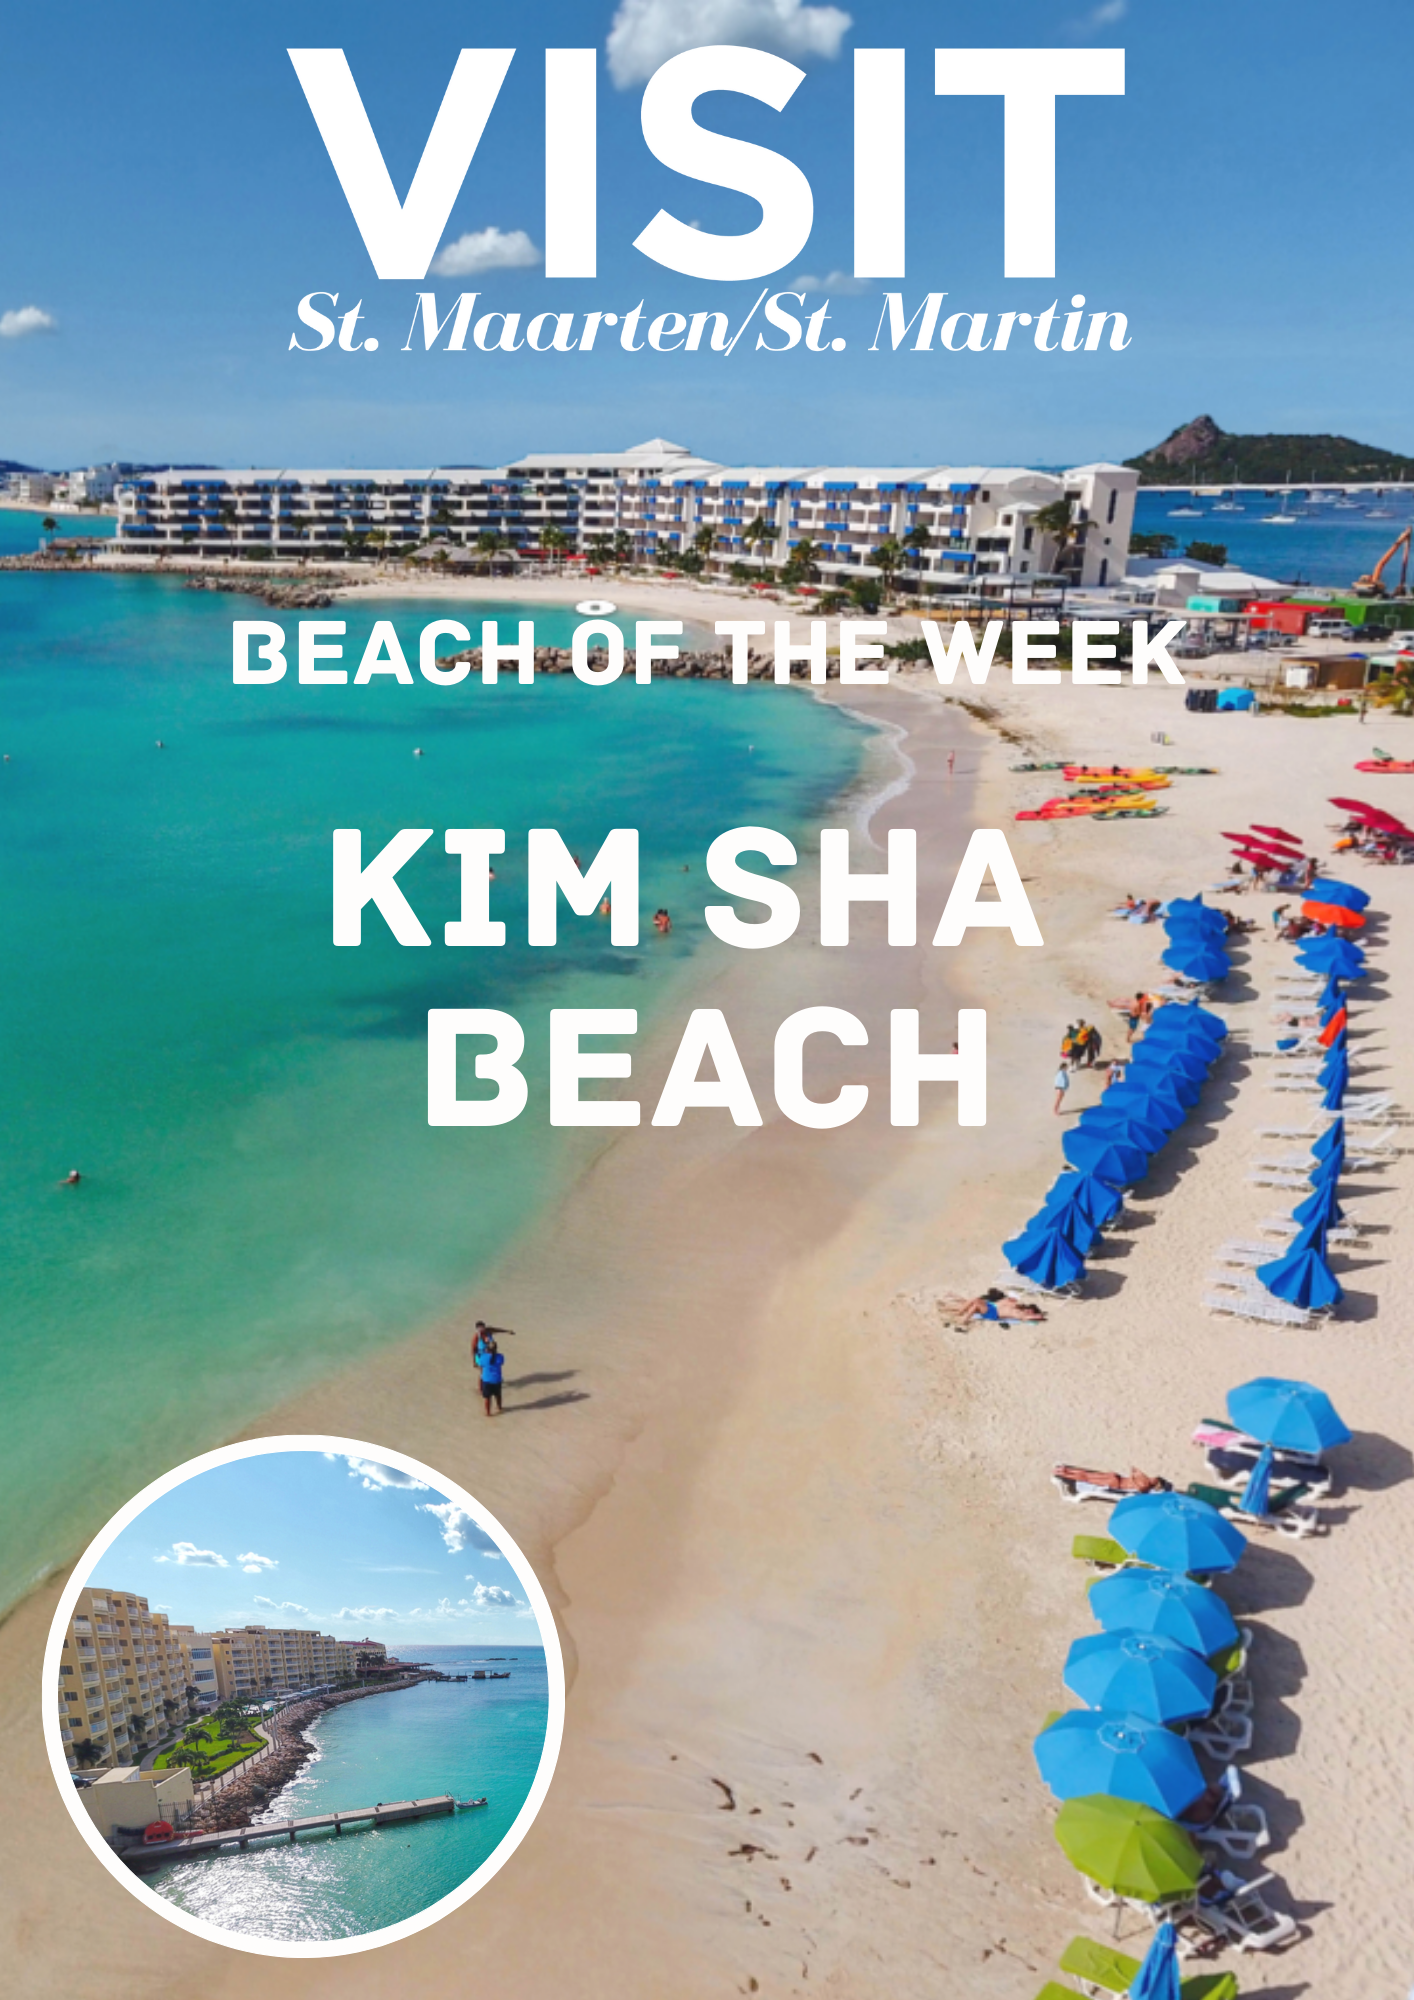 Beach of the week is Kim Sha beach located in the SImpson Bay Area of St Maarten